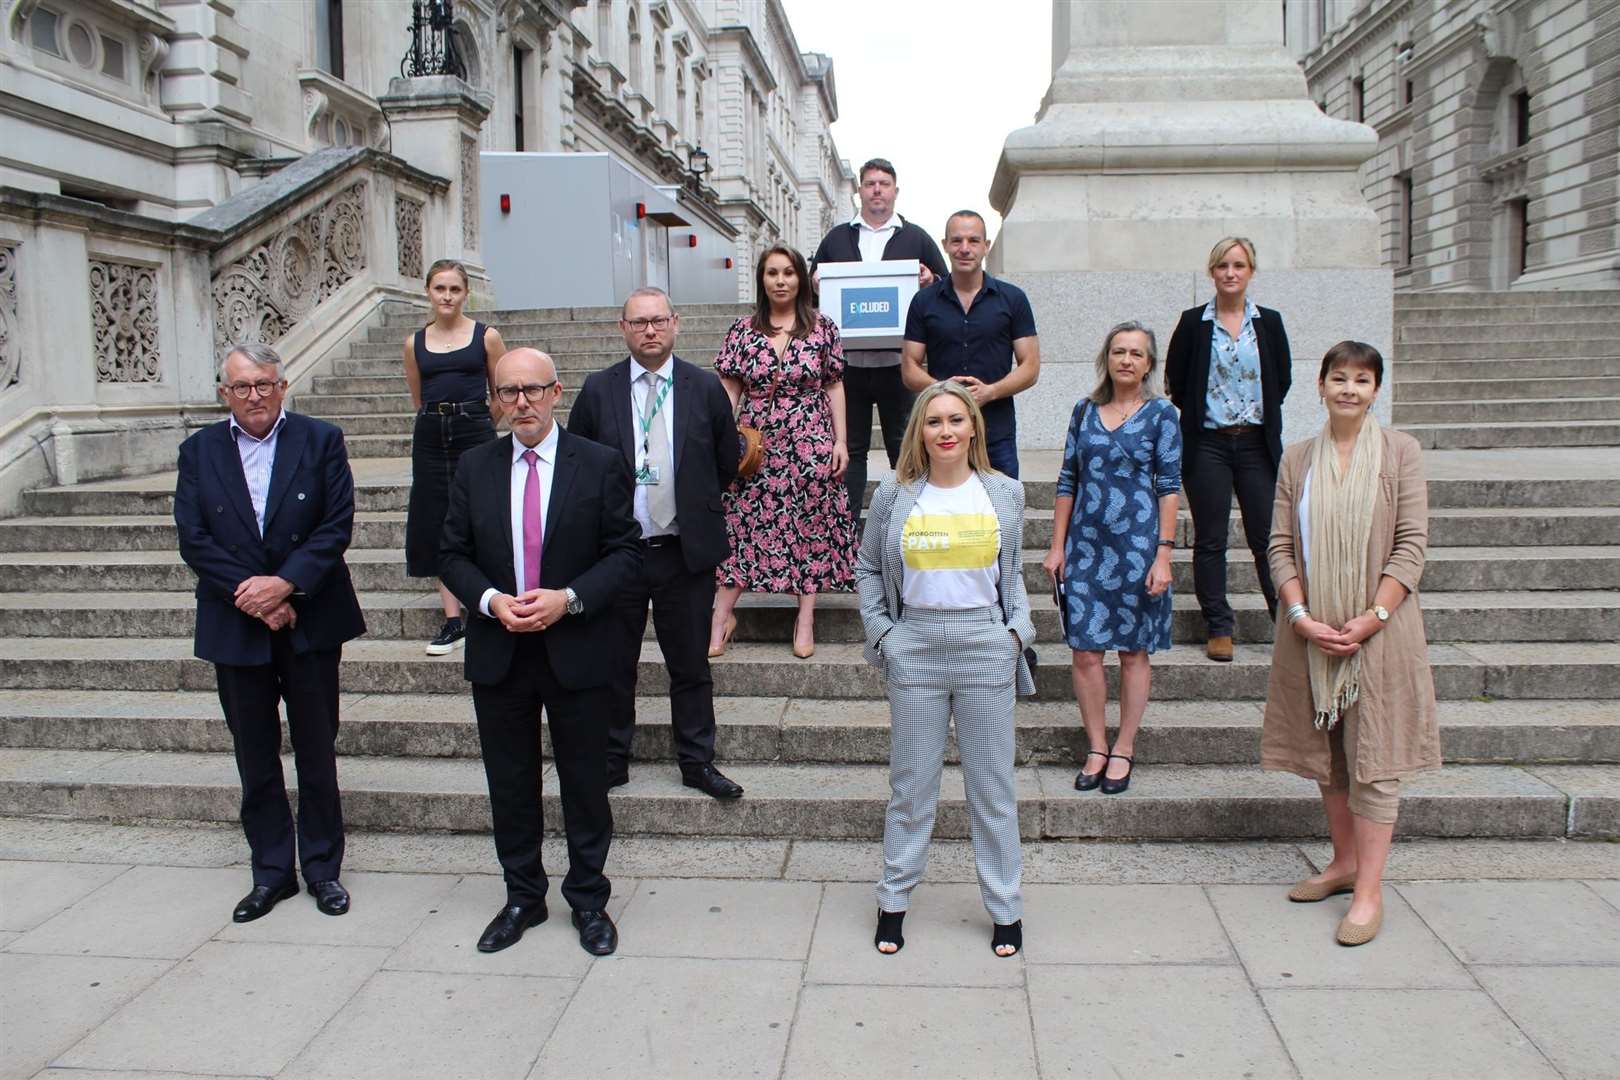 Jamie Stone was joined by MPs from all parties in delivering the ExcludedUK petition to the Treasury.